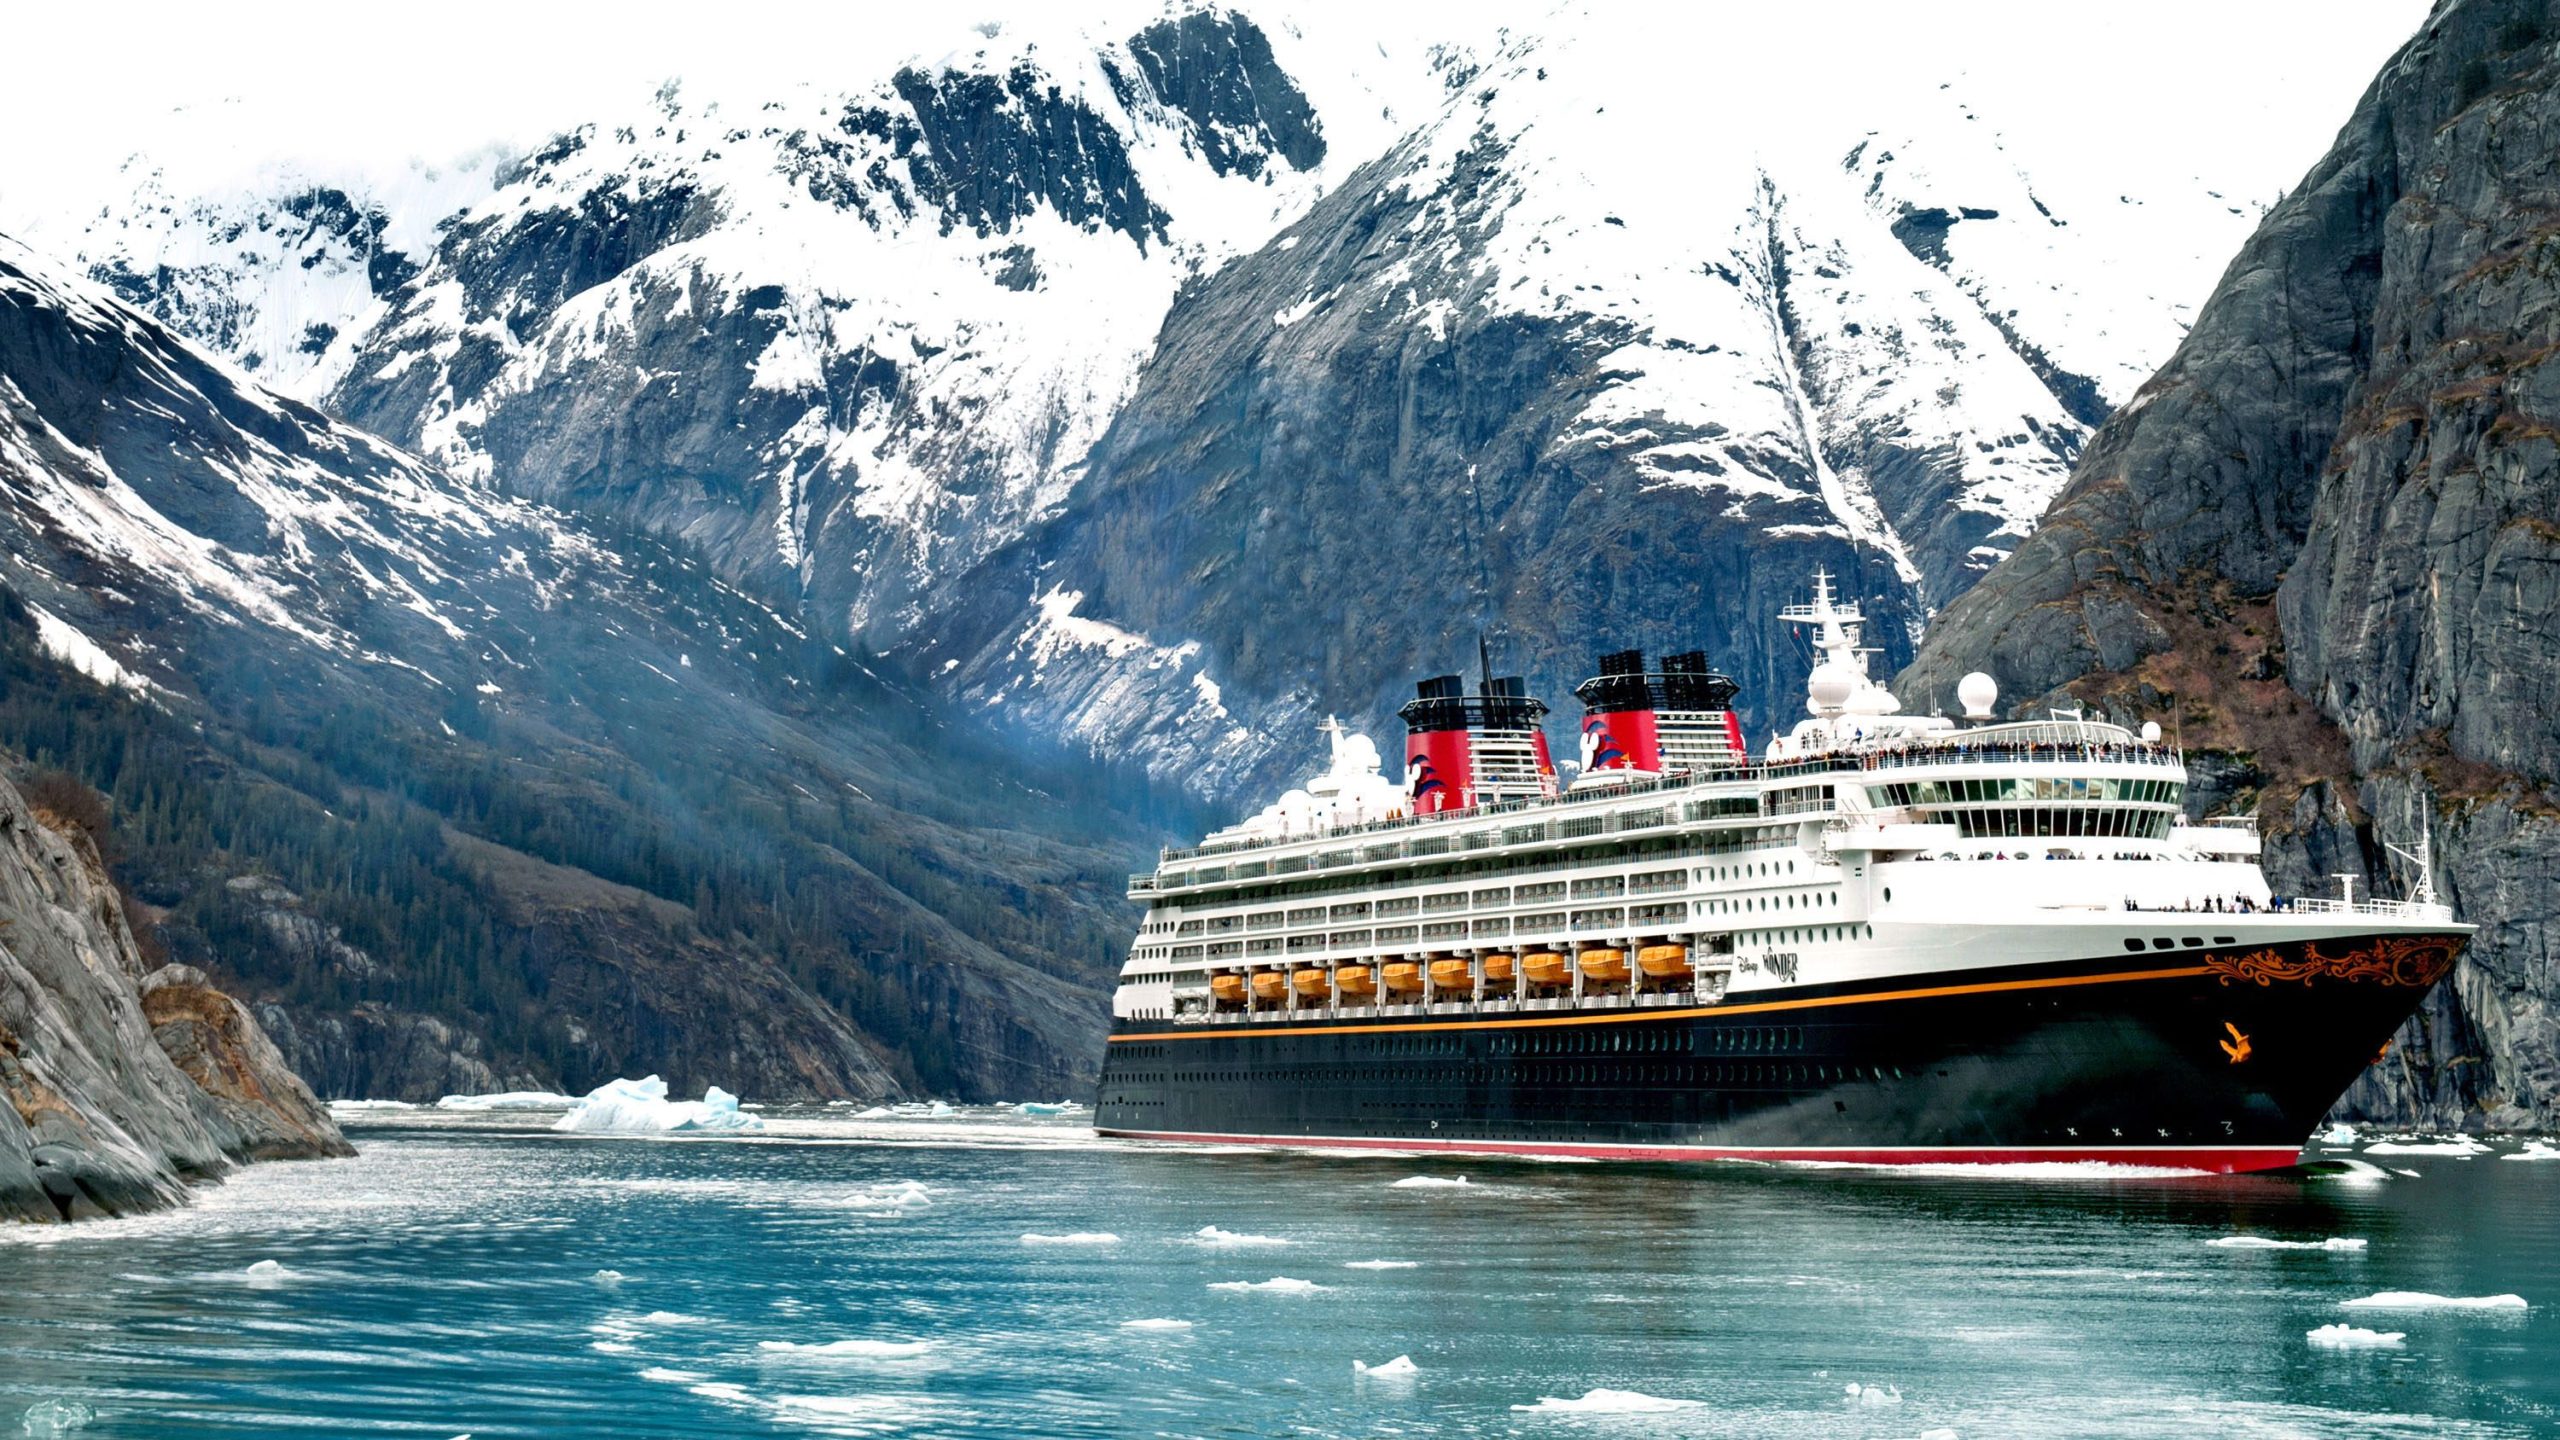 9 Things You Need for Your Disney Cruise - Paintbrushes & Popsicles